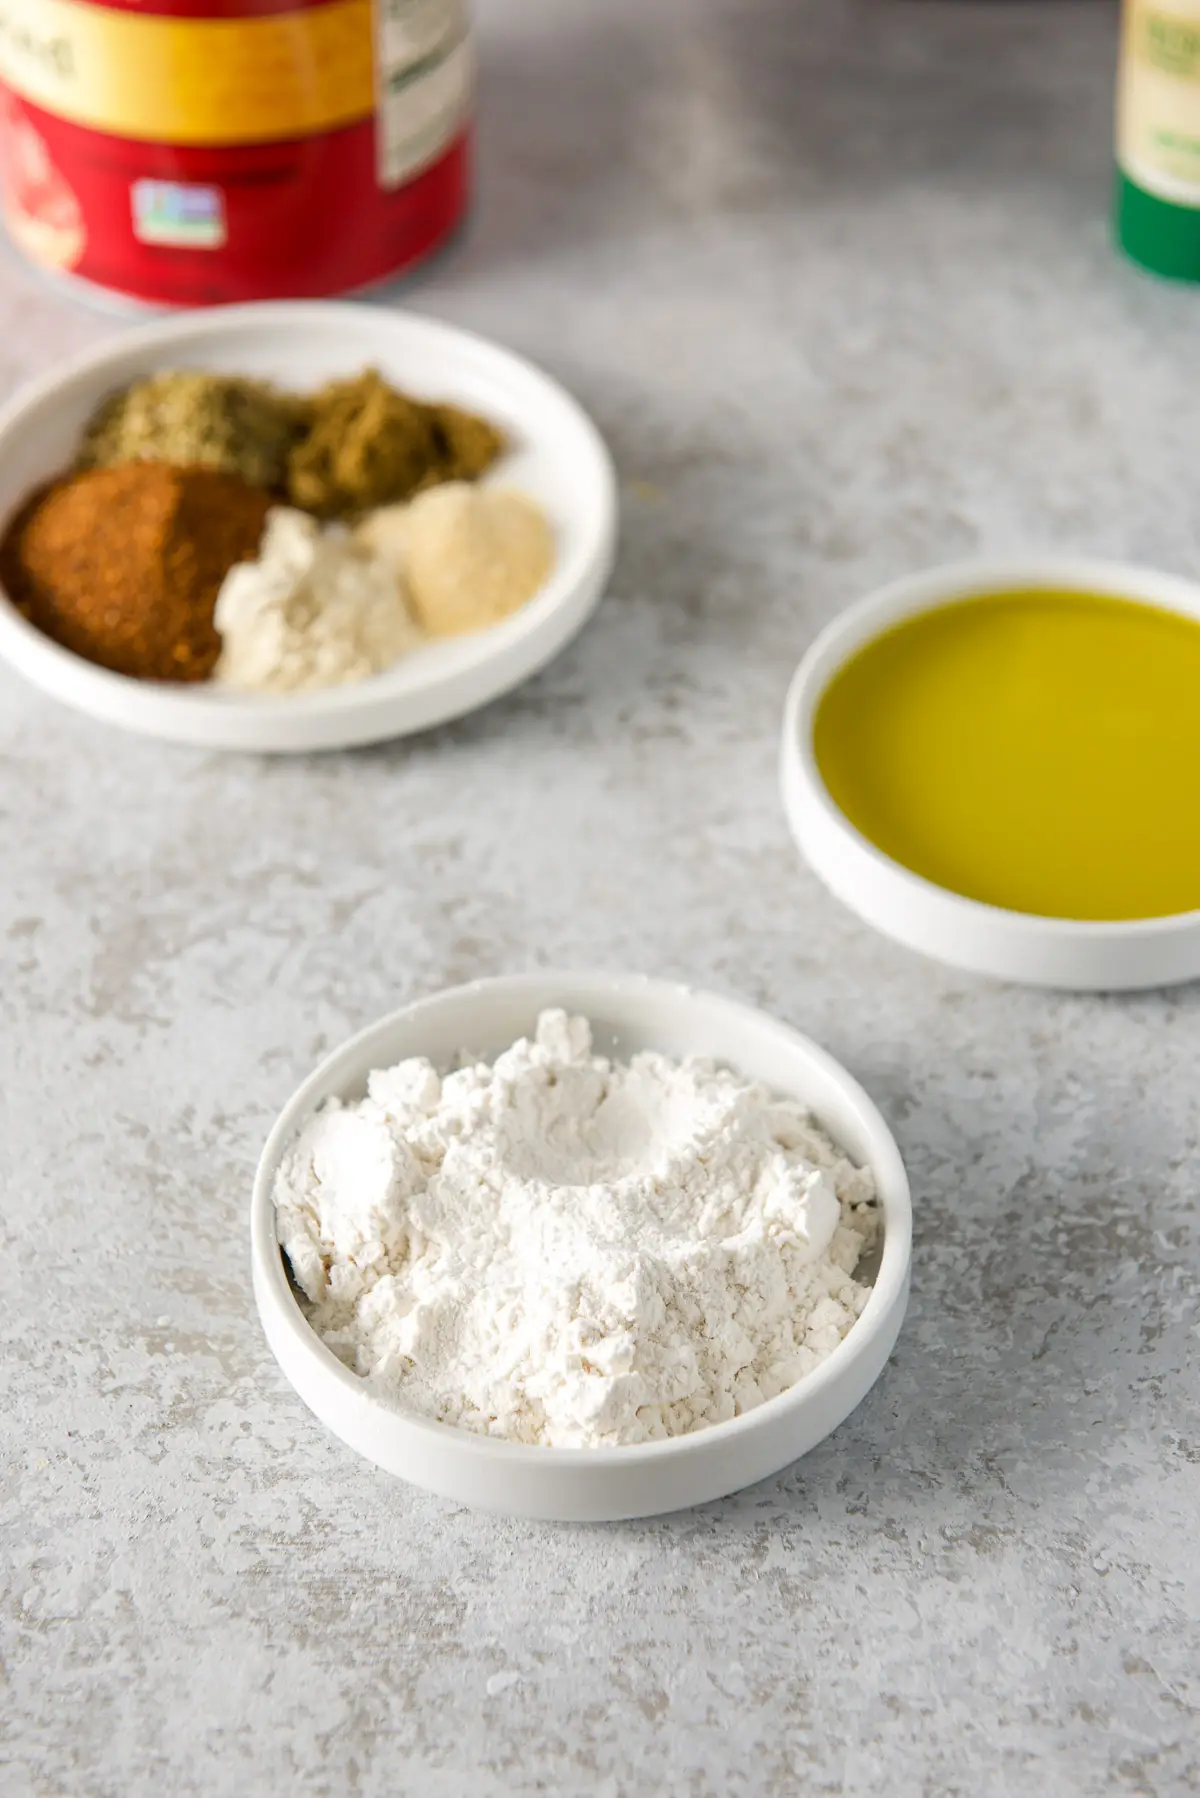 Flour, olive oil, spices and herbs in small white plates